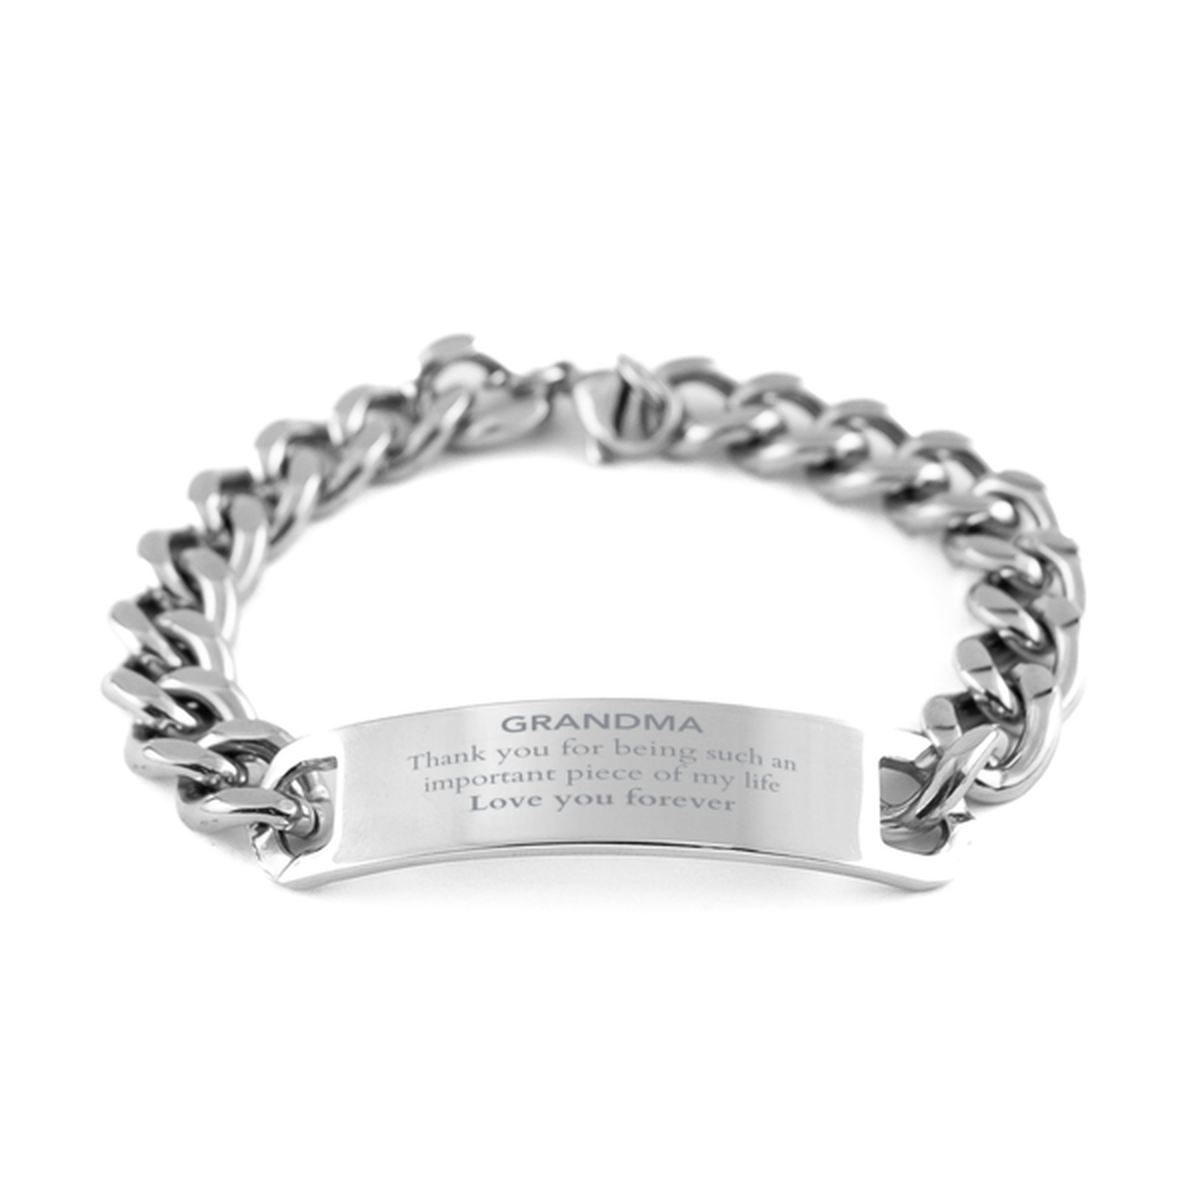 Appropriate Grandma Cuban Chain Stainless Steel Bracelet Epic Birthday Gifts for Grandma Thank you for being such an important piece of my life Grandma Christmas Mothers Fathers Day